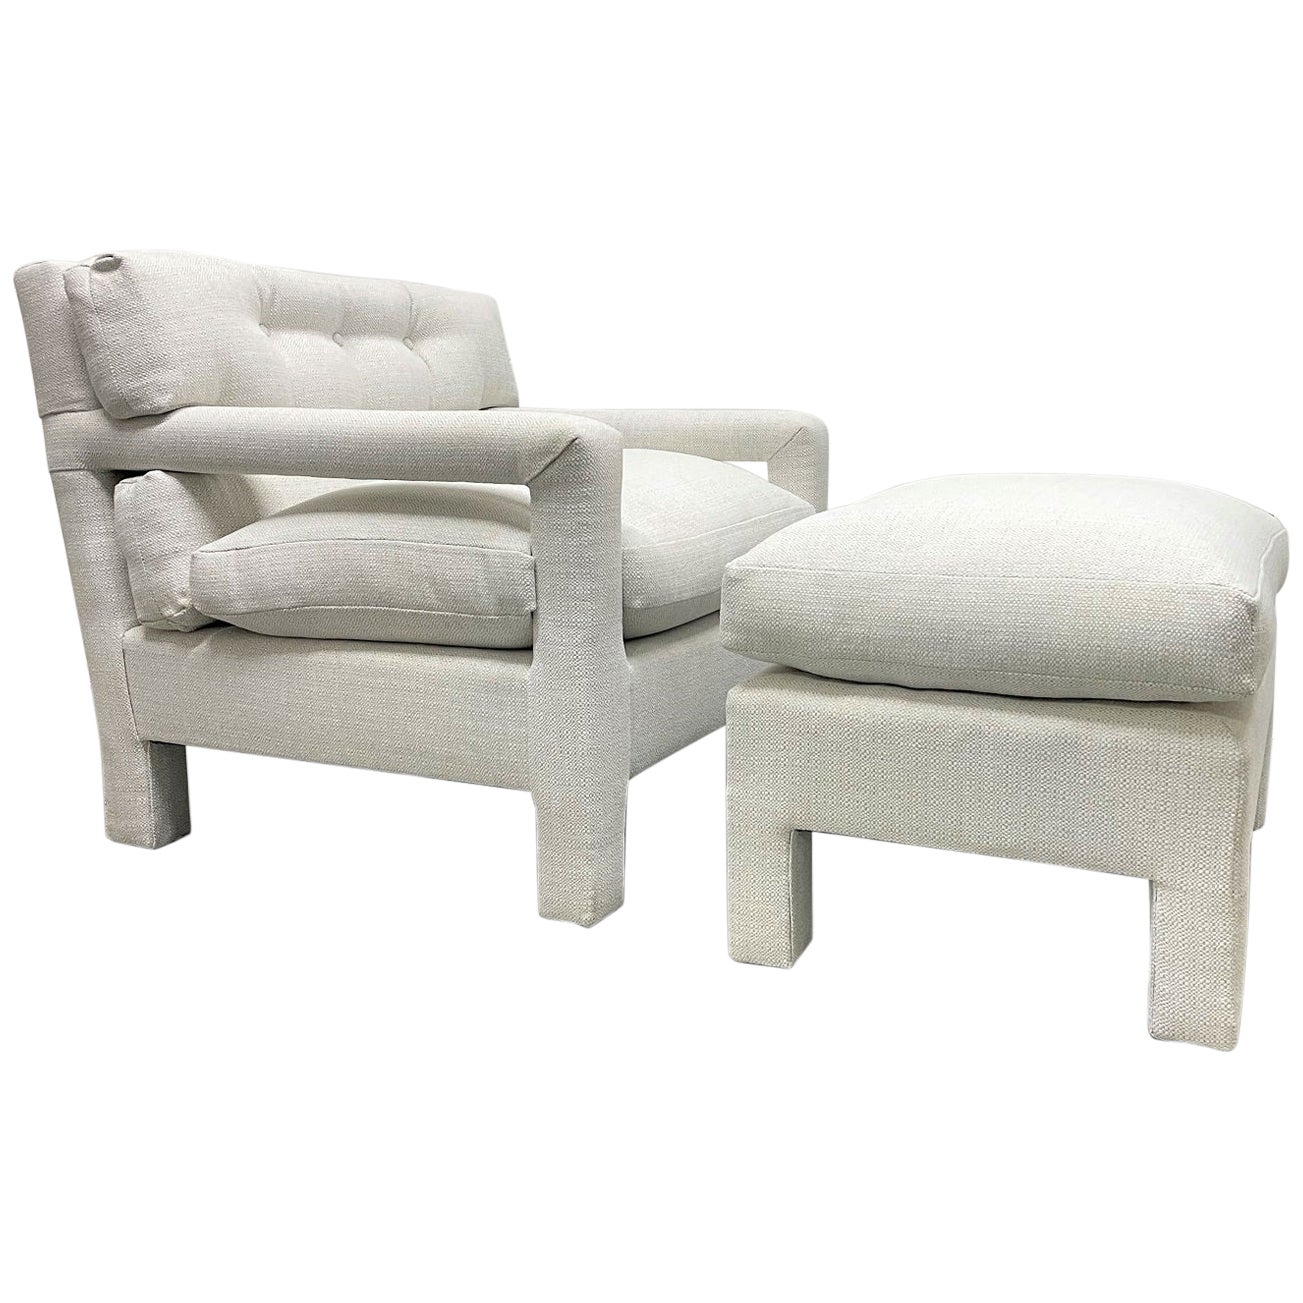 Milo Baughman Style Parsons Lounge Chair and Matching Ottoman